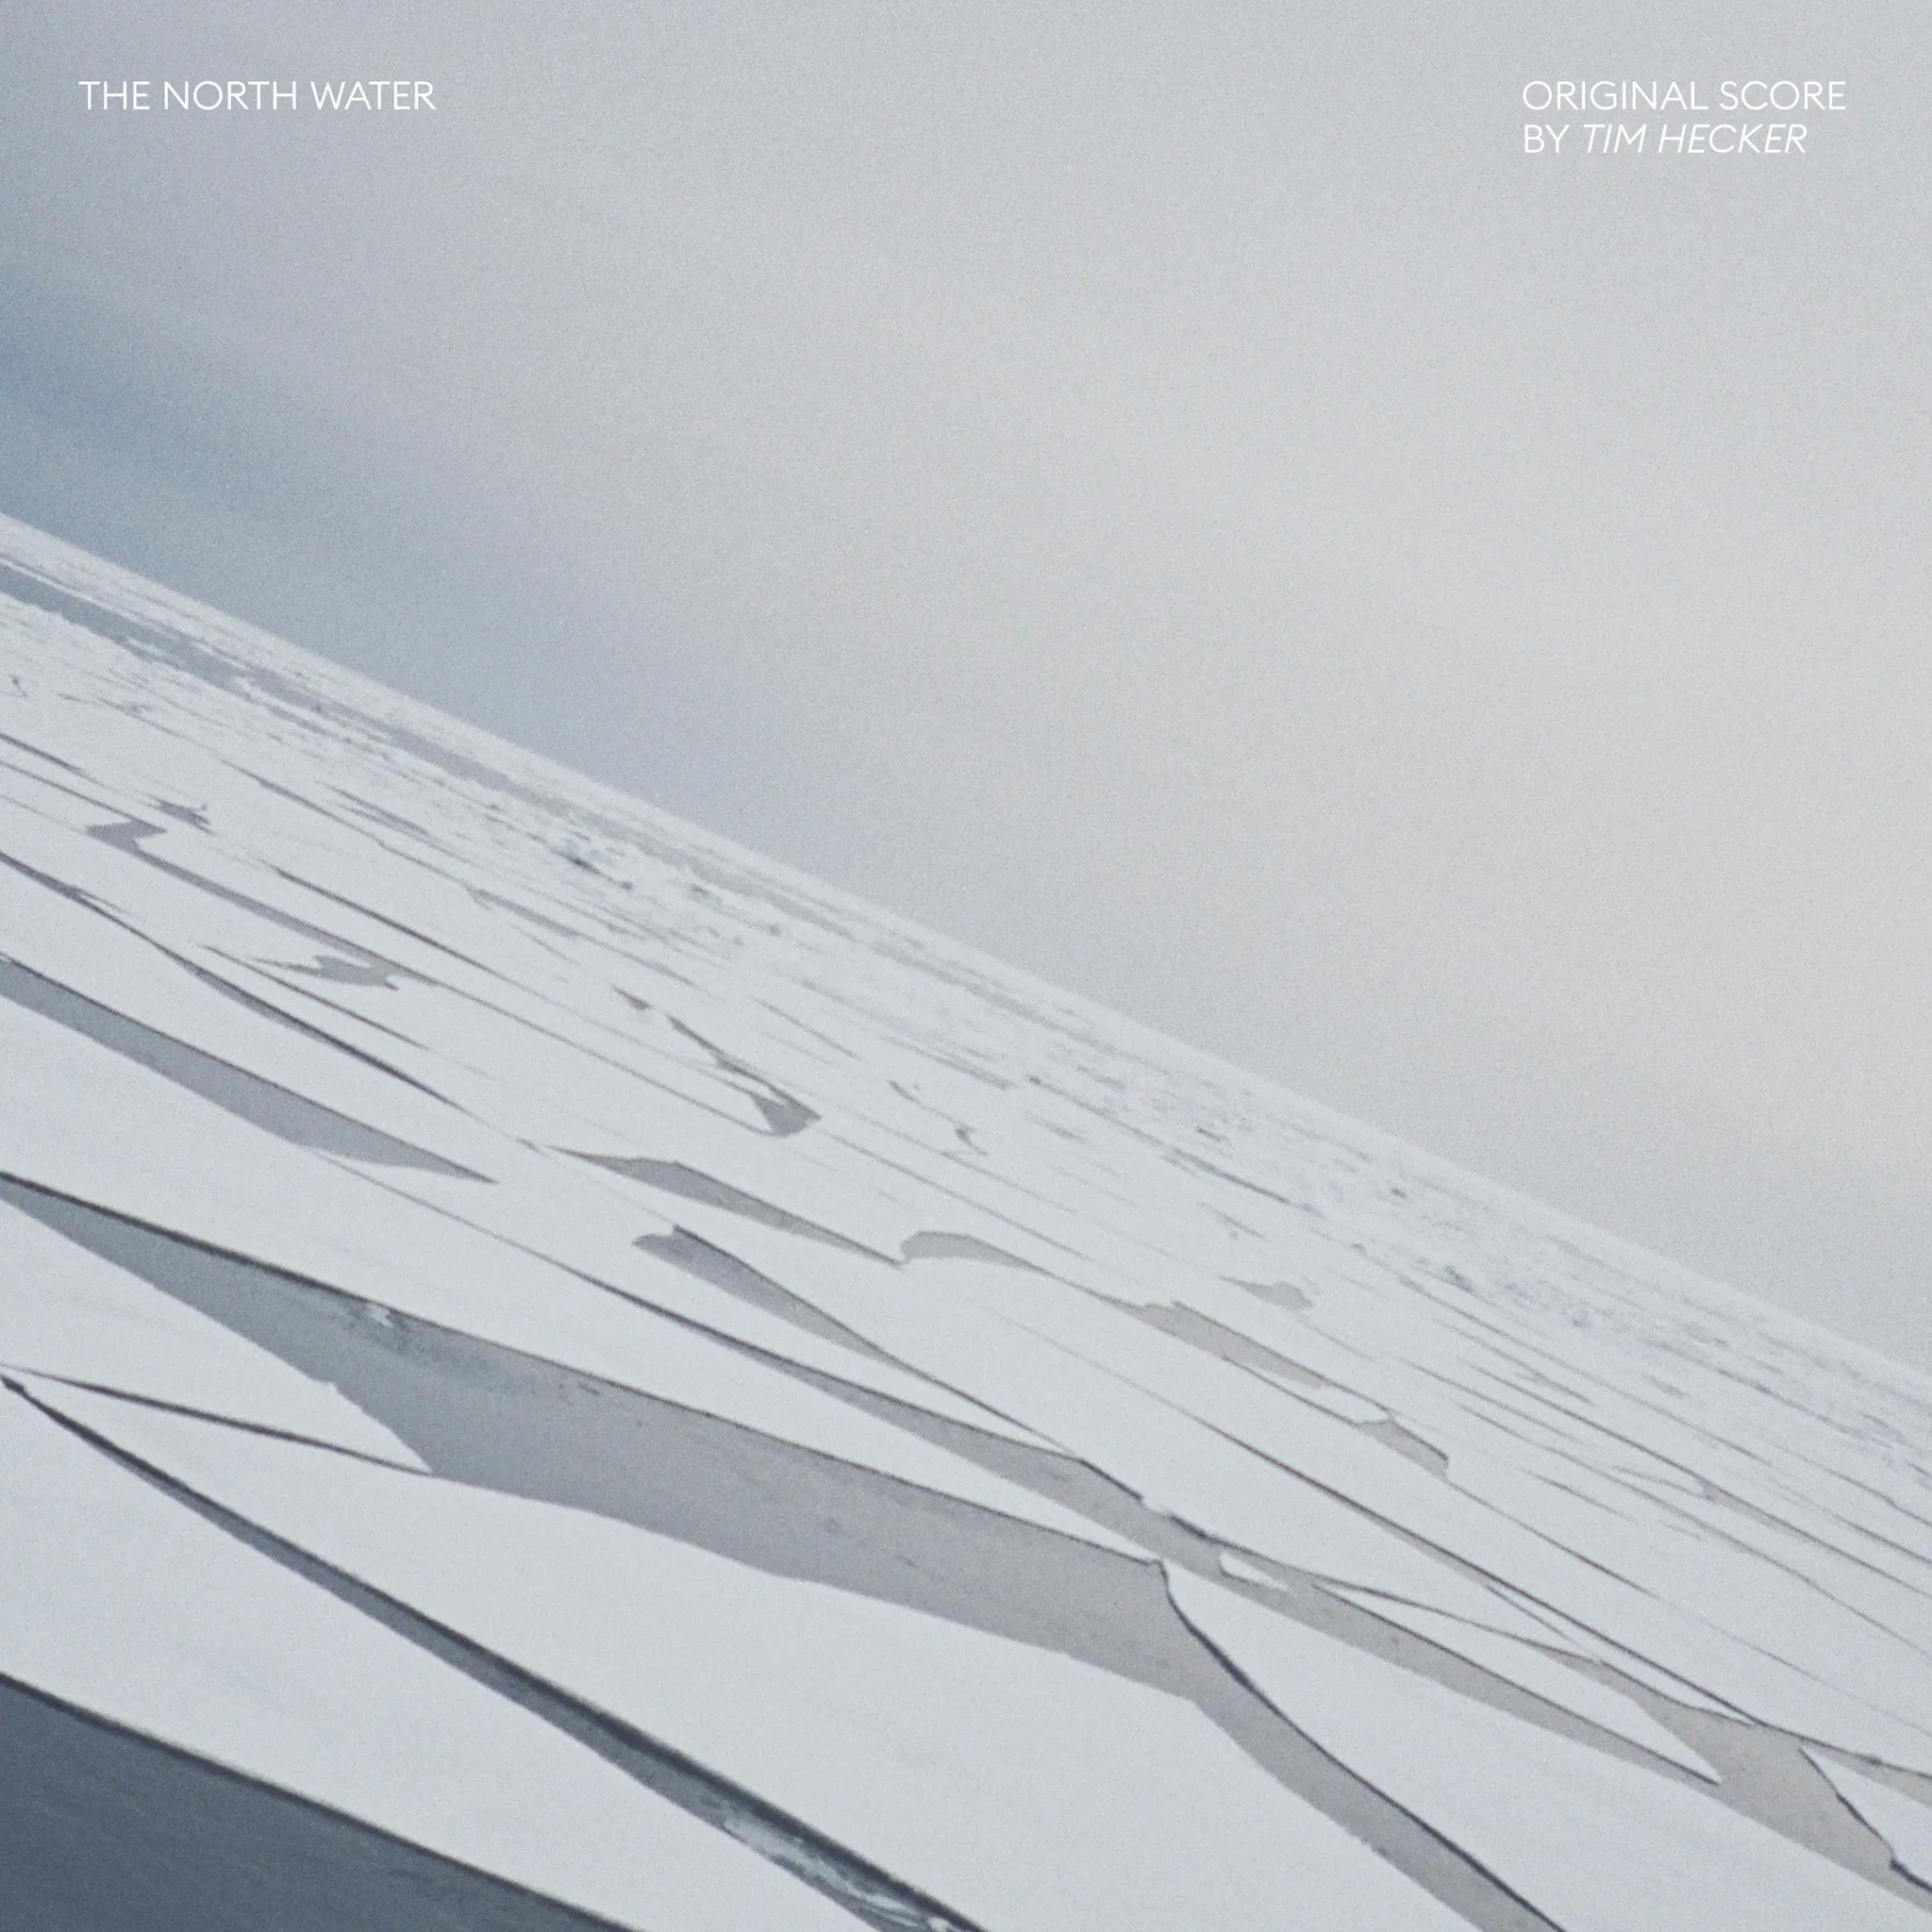 <strong>Tim Hecker - The North Water (Original Score)</strong> (Vinyl LP - clear)